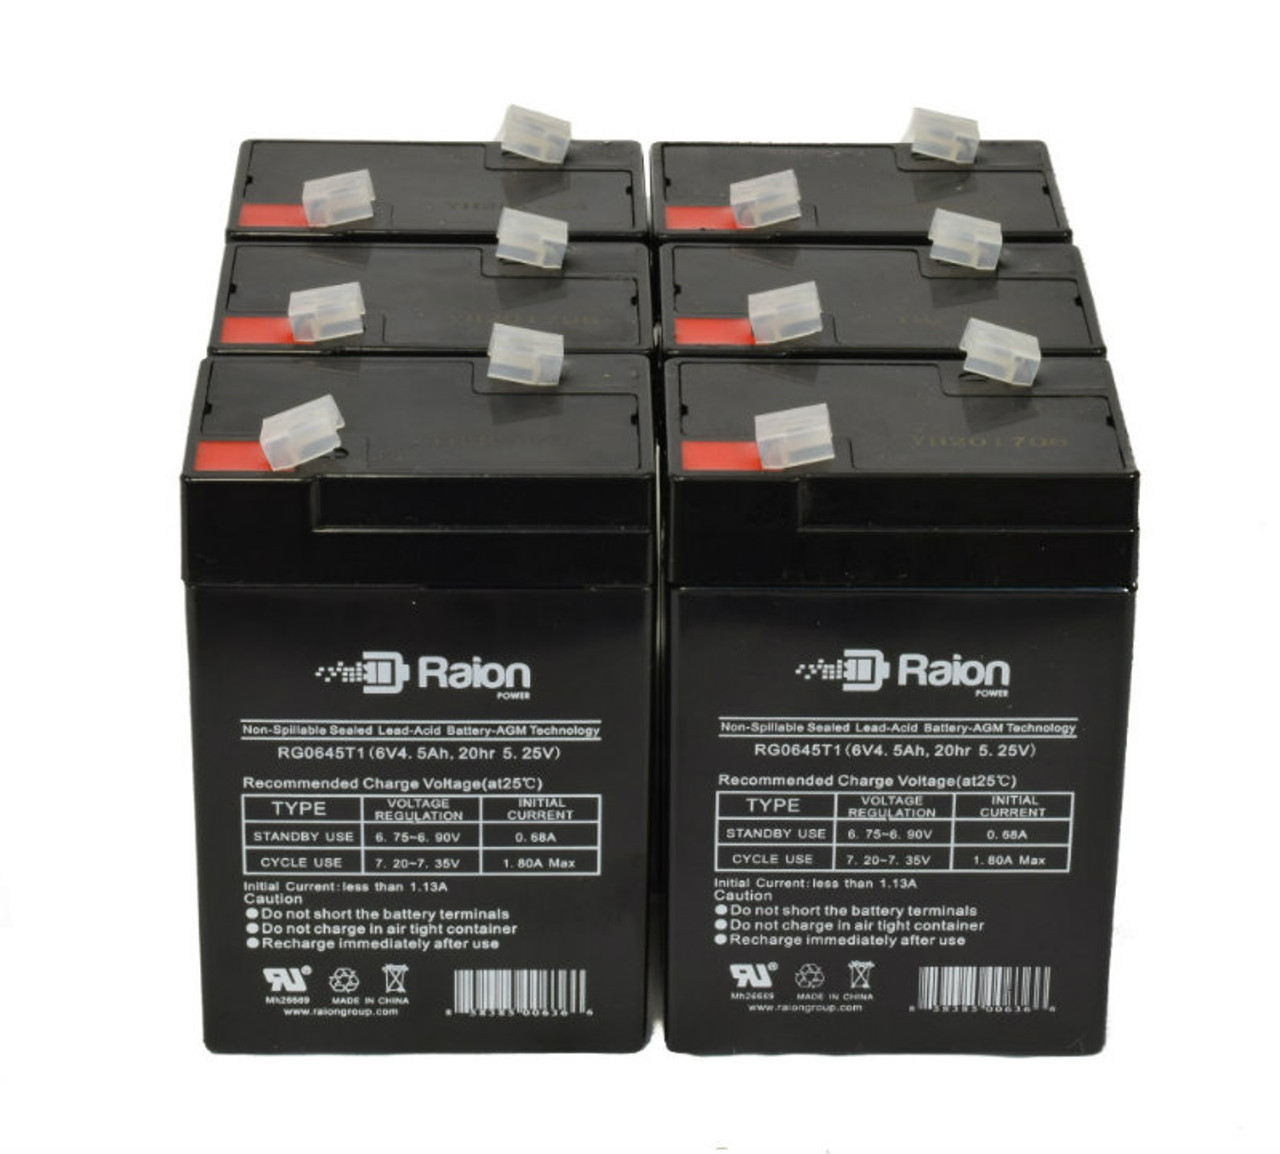 Raion Power 6V 4.5Ah Replacement Emergency Light Battery for Teledyne 2CL6S5 - 6 Pack